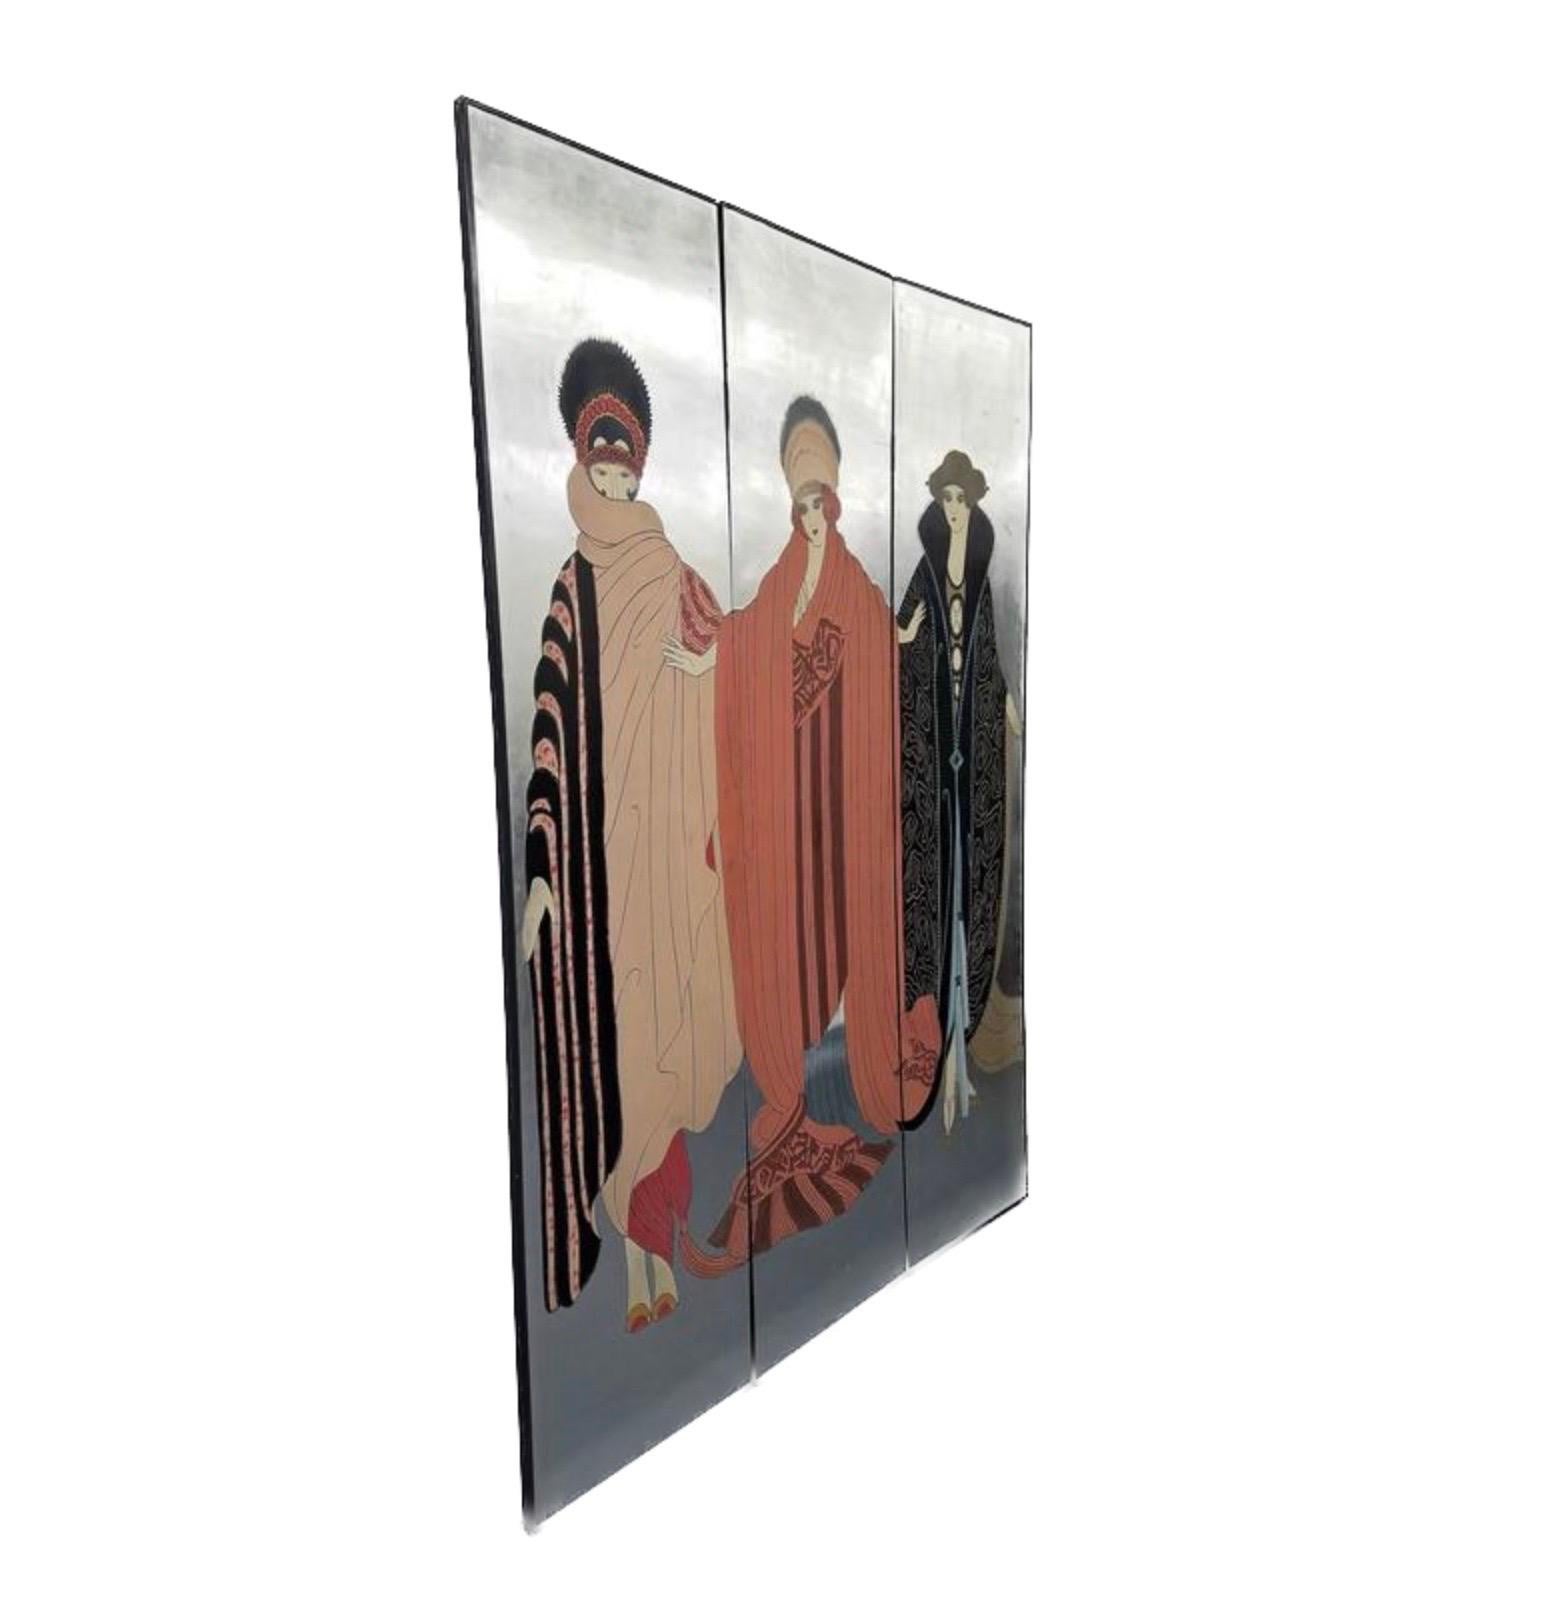 Erté Art Deco Style Silver Leaf Three-Panel Screen Art Room Divider In Good Condition For Sale In Evanston, IL